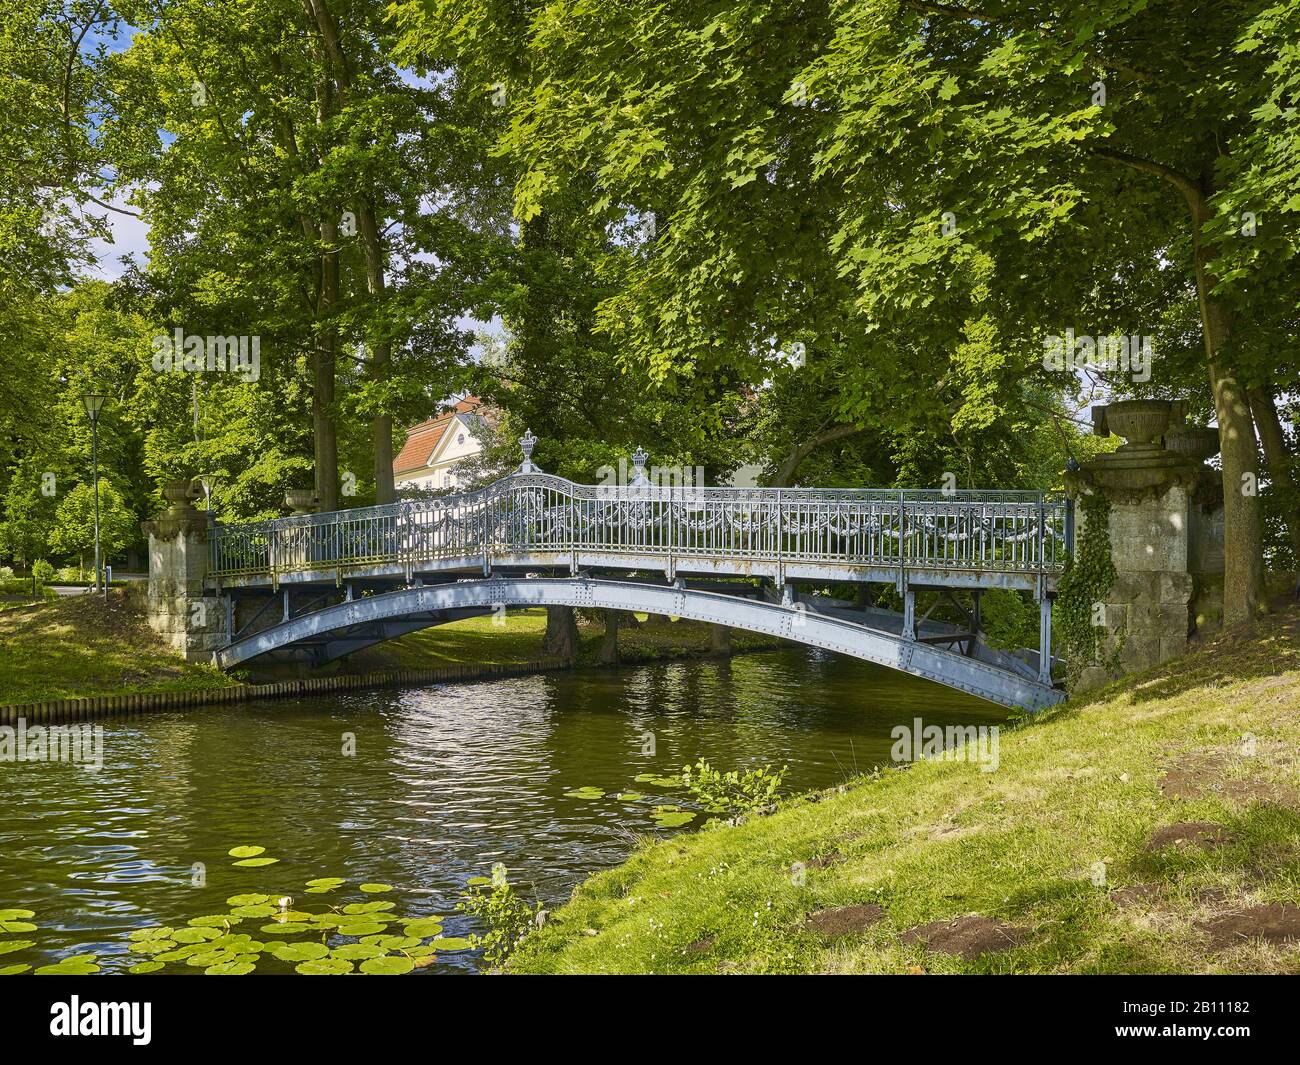 Bridge from the castle island Mirow to the love island in the Mirower lake, Mirow, Mecklenburg-Vorpommern, Germany Stock Photo